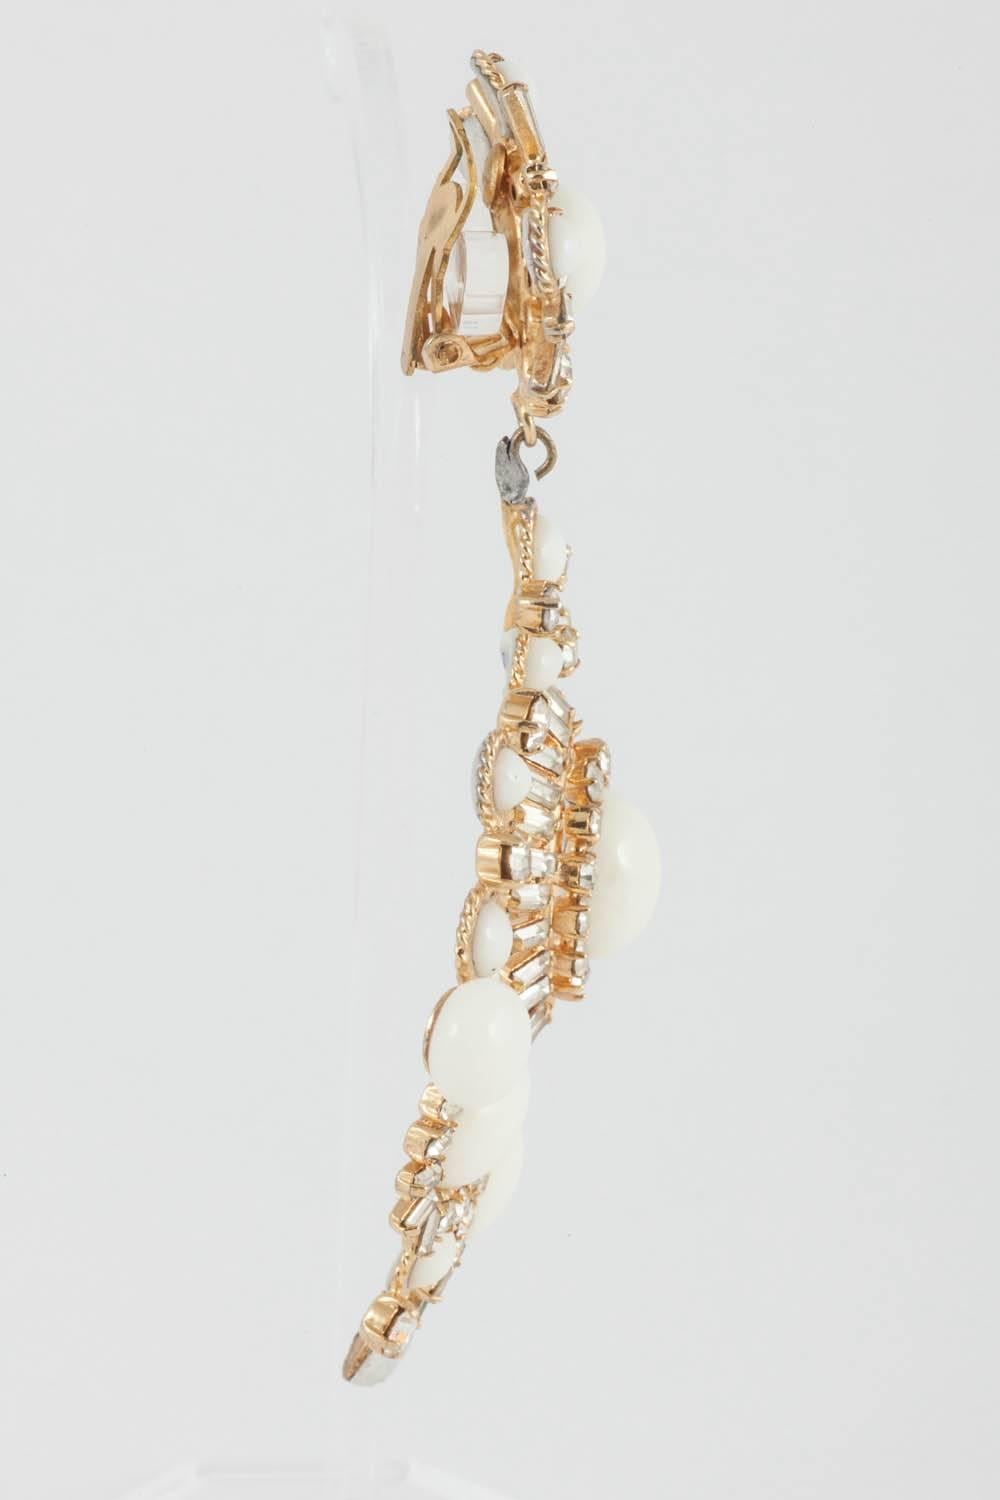 Very long poured glass and paste drop earrings, Maison Gripoix, France, 1960s. 1